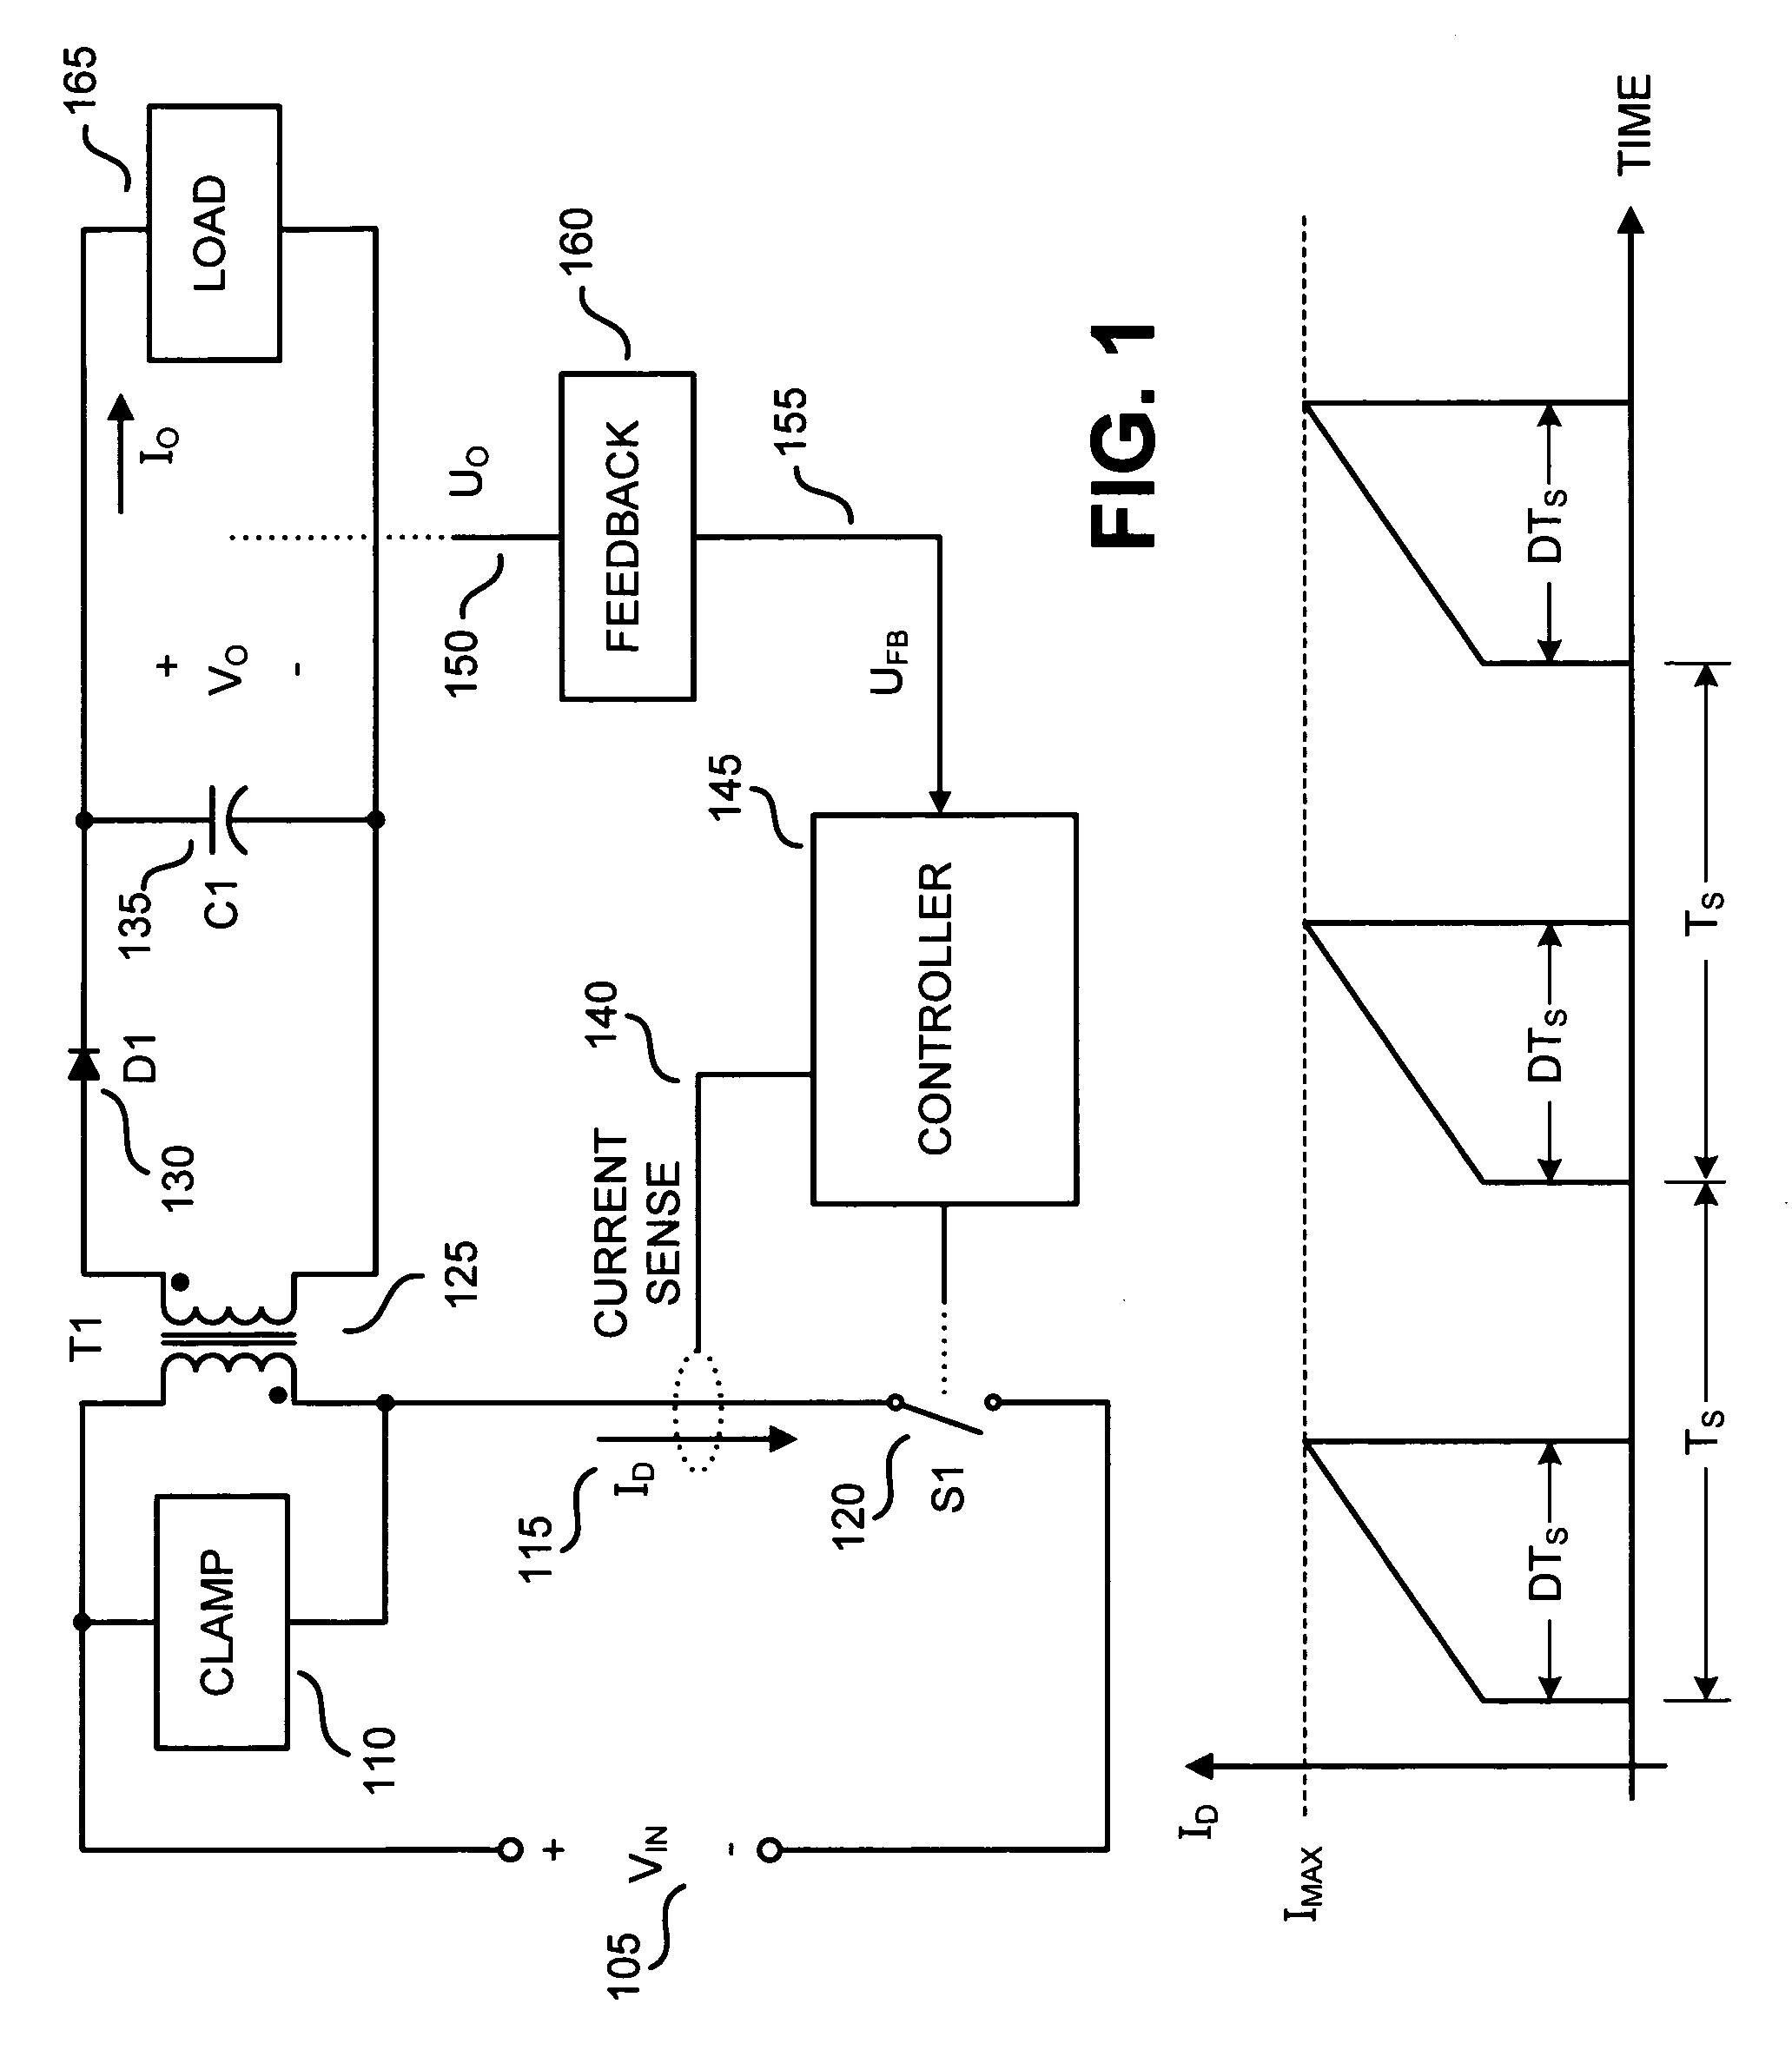 Method and apparatus to control either a regulated or an unregulated output of a switching power supply